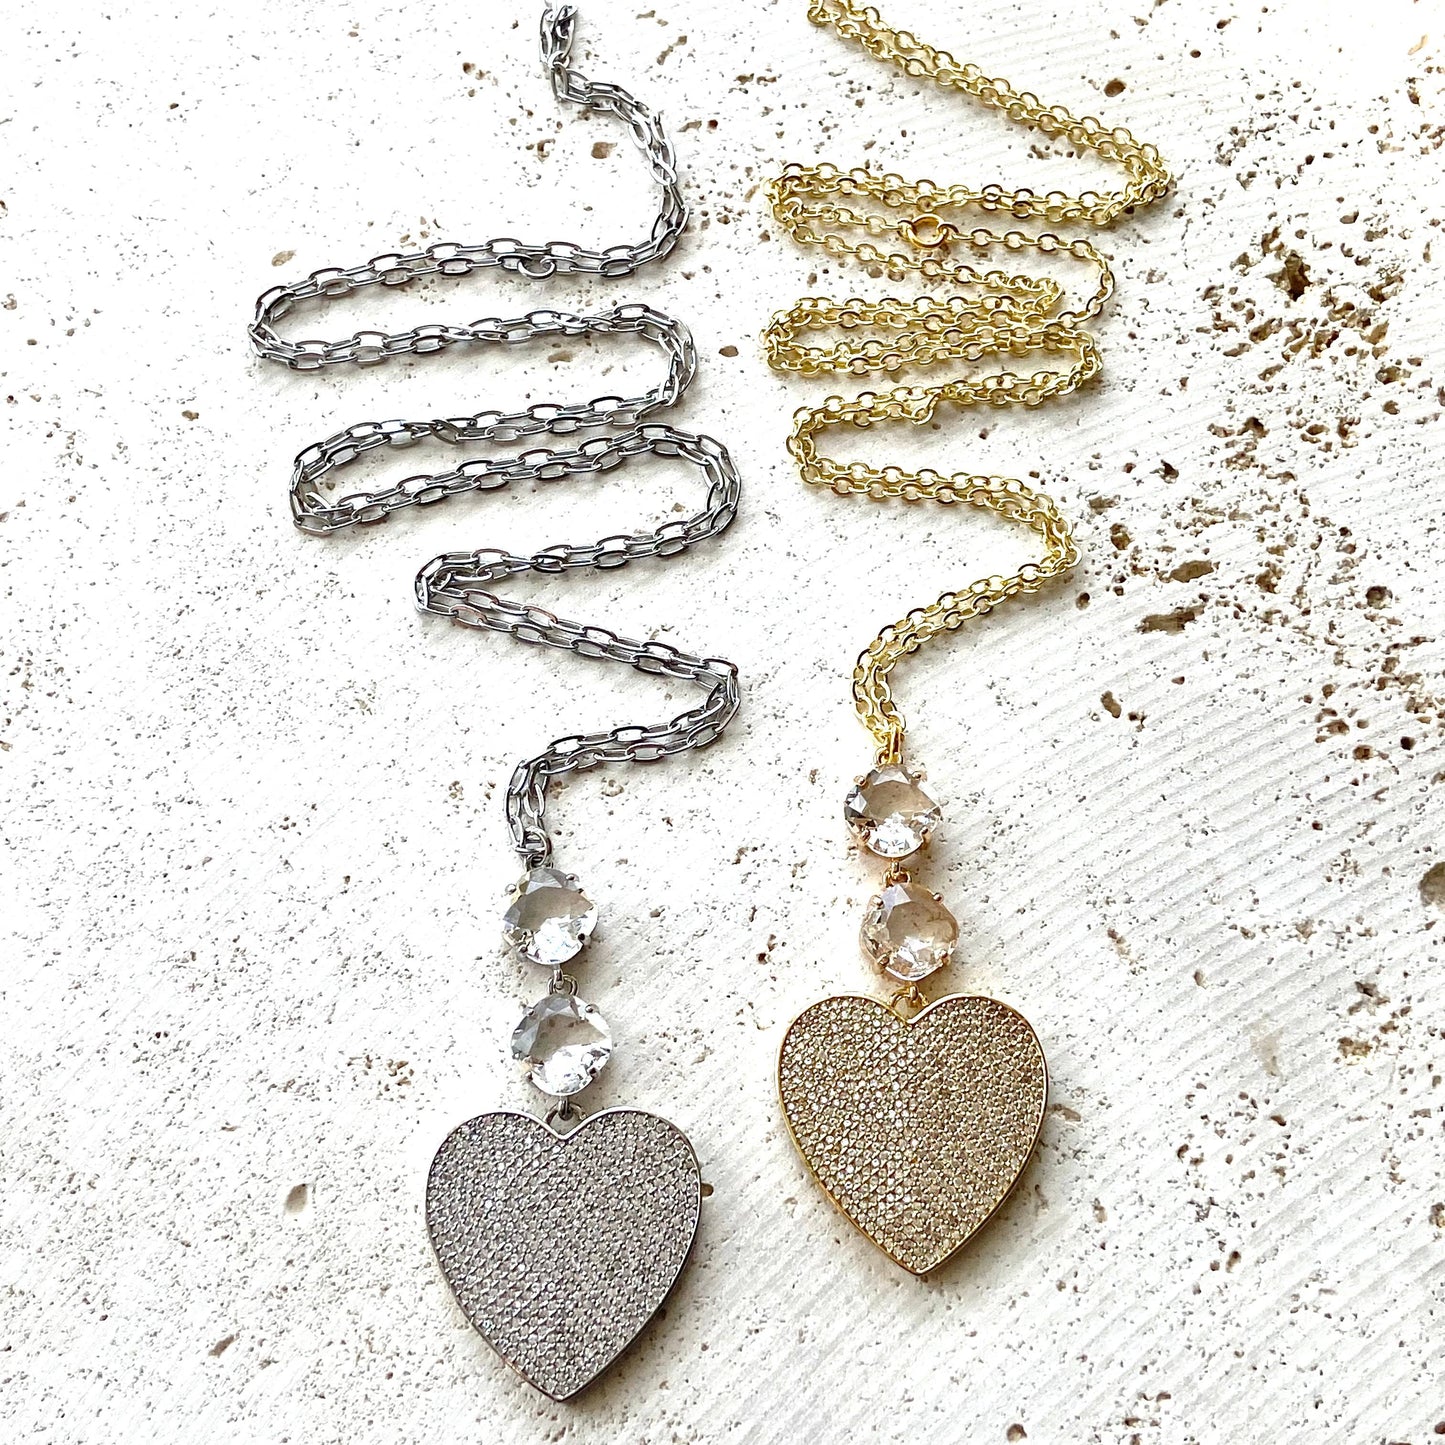 Crystal heart necklace valentine jewelry boutique gift: Gold